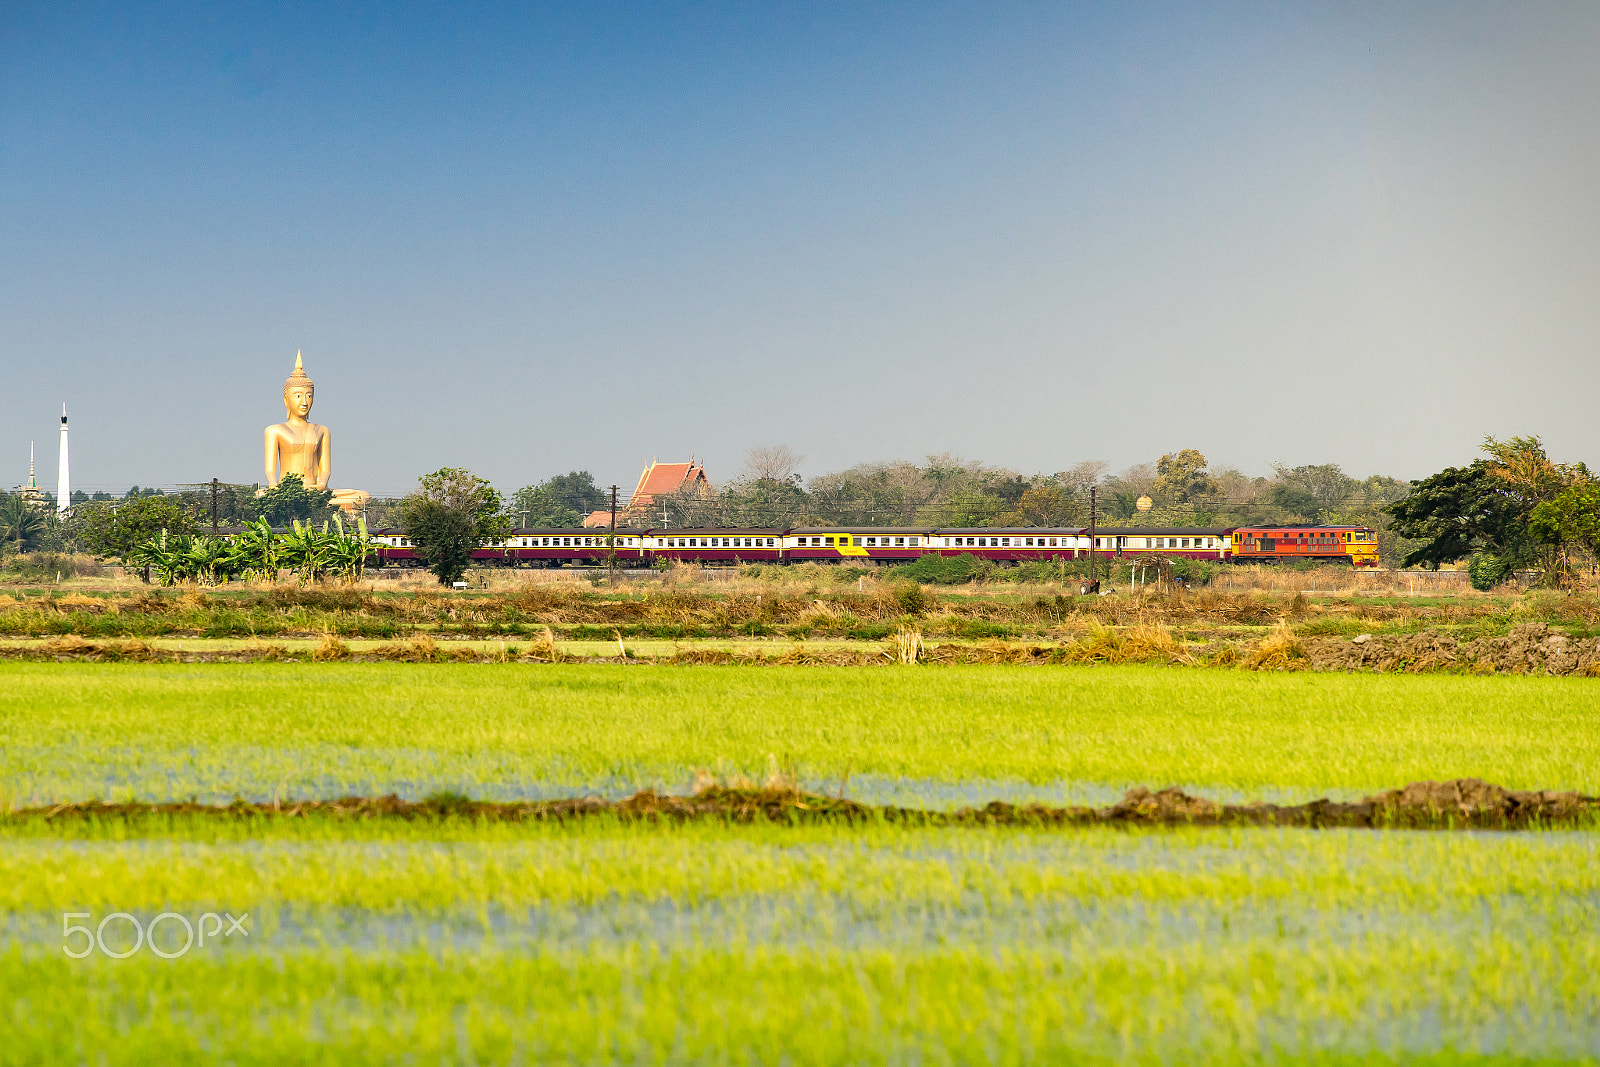 Sony a7 II + Tamron 18-270mm F3.5-6.3 Di II PZD sample photo. Train over the rice field and giant buddha photography